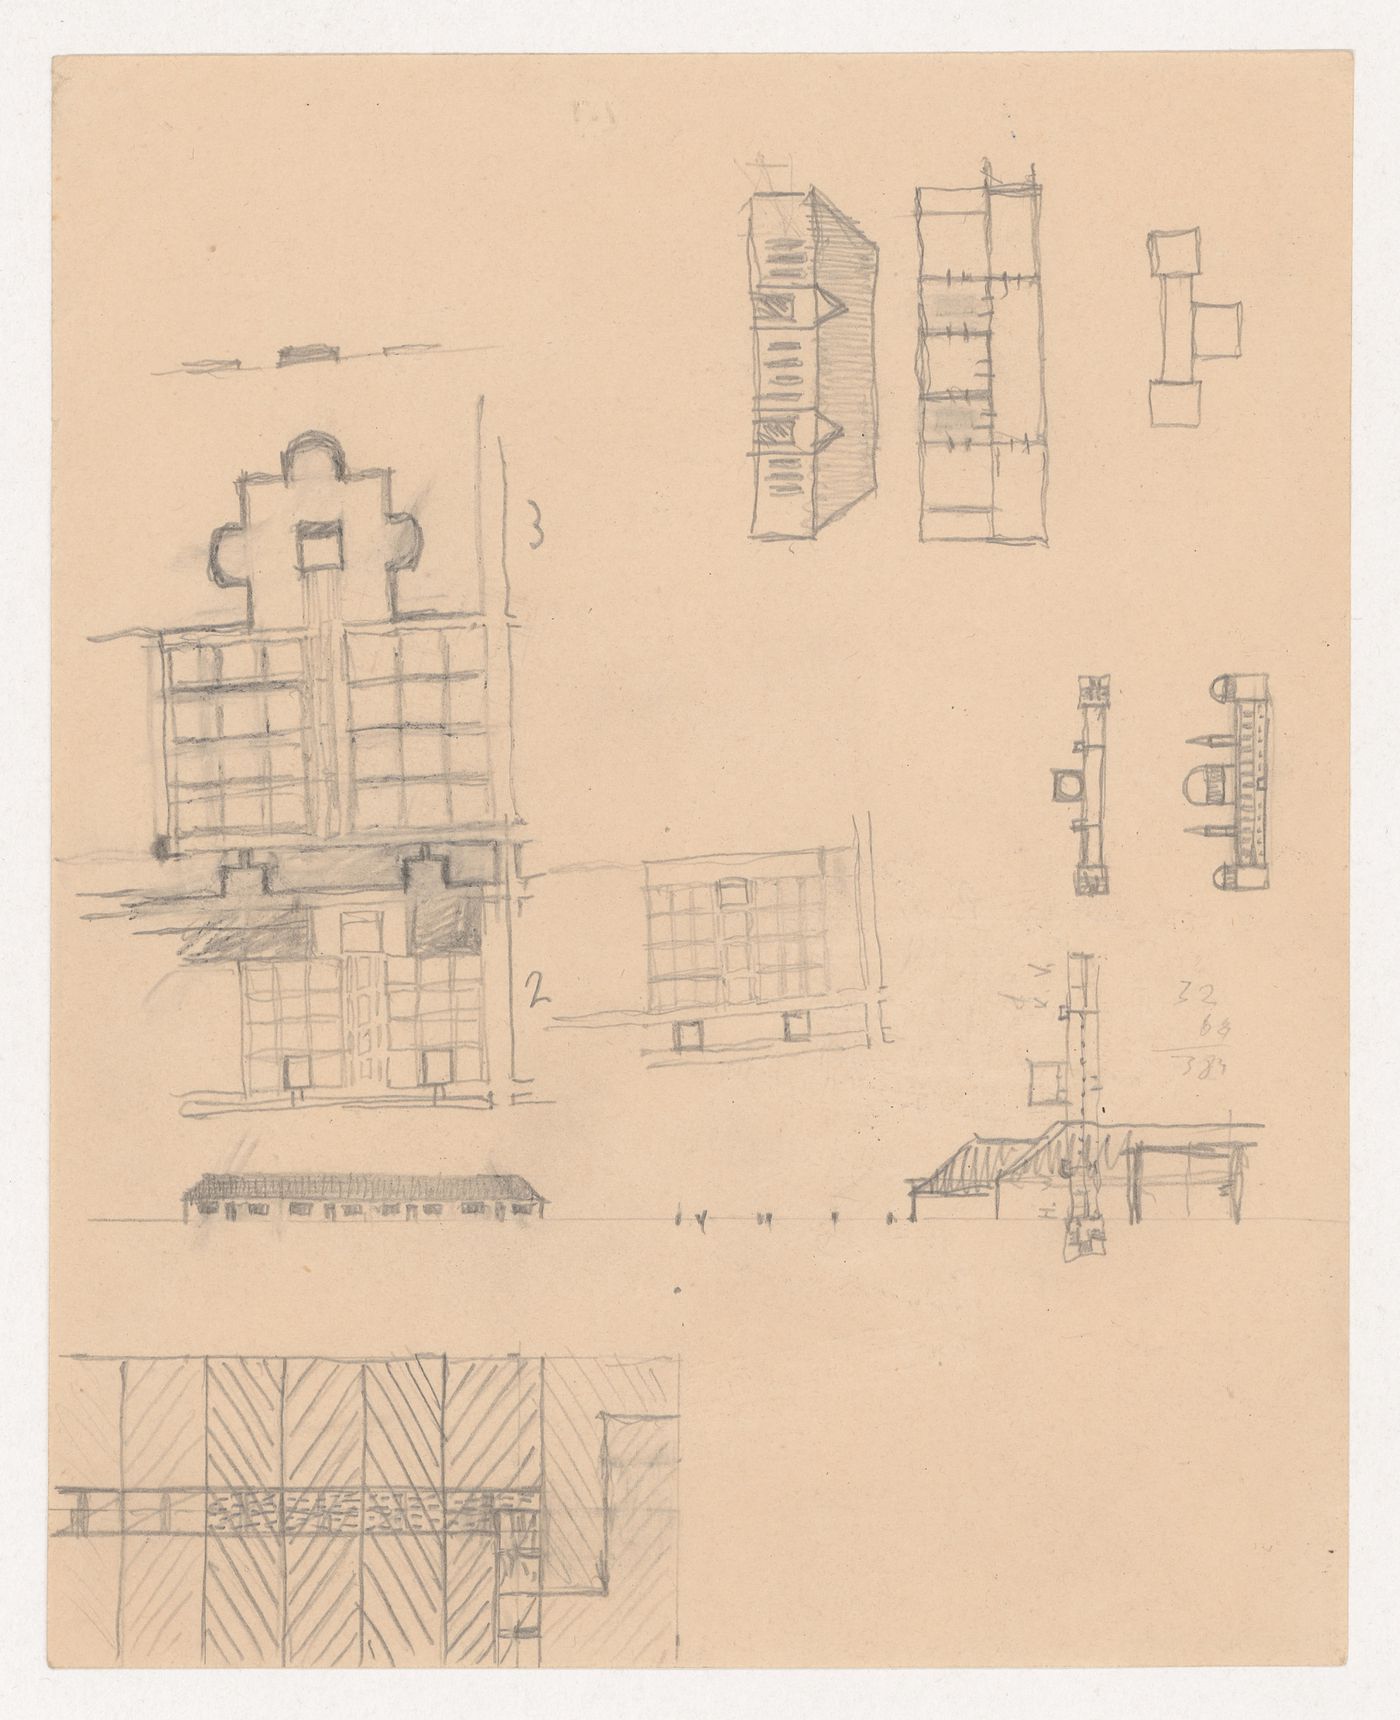 Sketches for buildings and building complexes